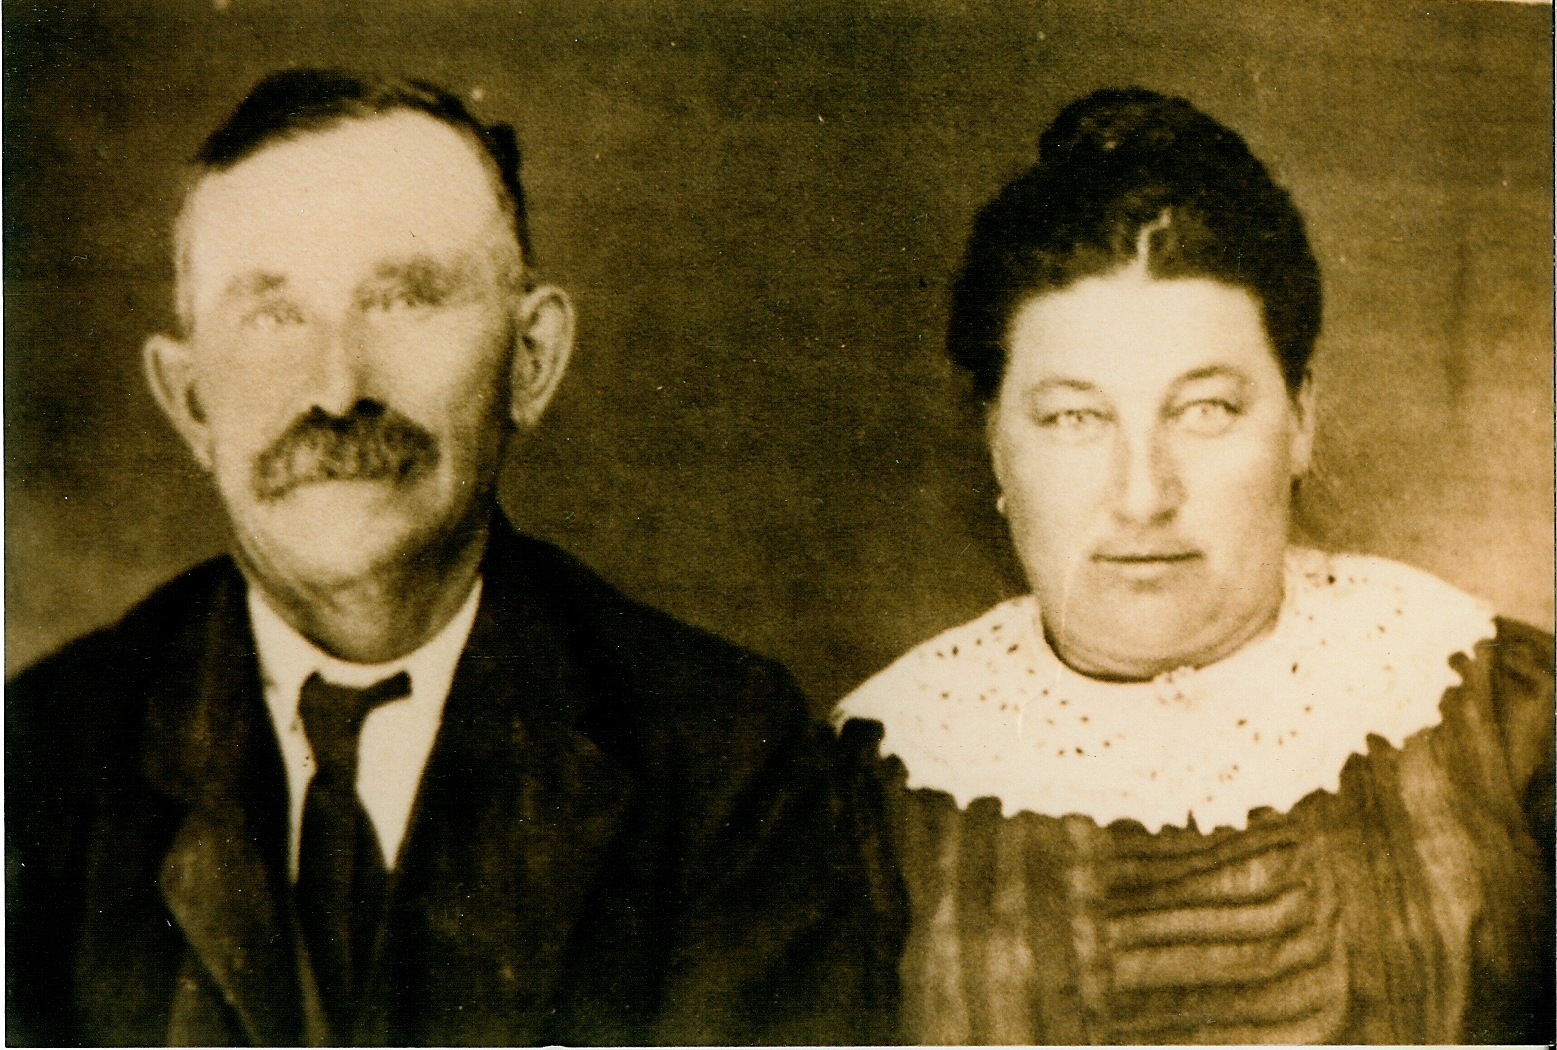 Ken and Ethel Powell of Wray